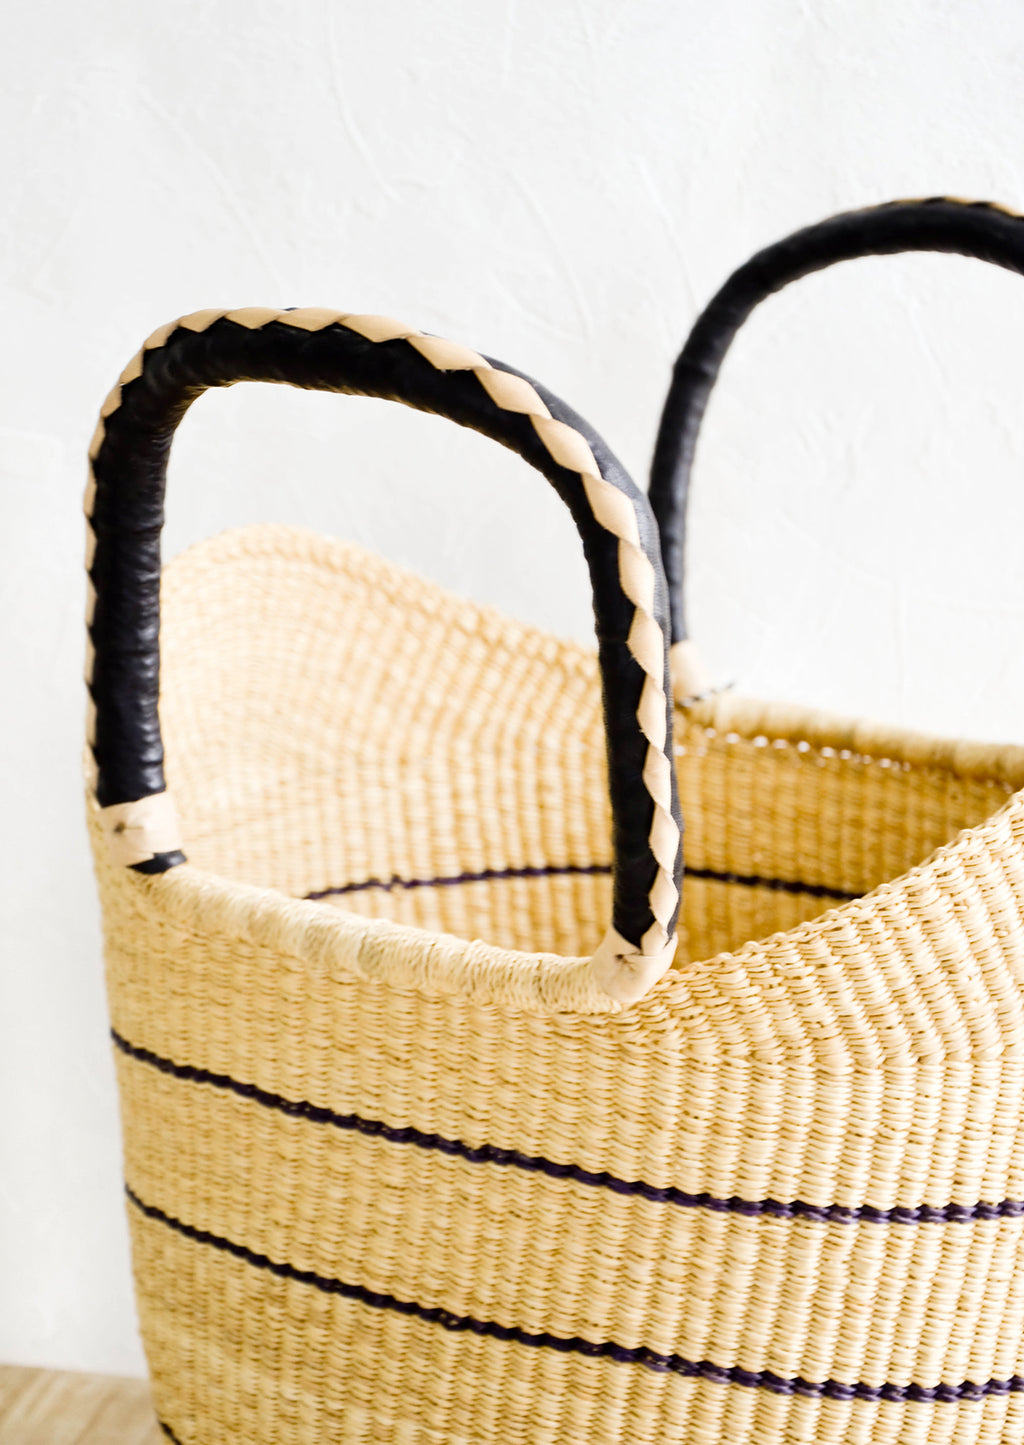 2: Leather handles on a woven totebag, woven in natural and black leather.